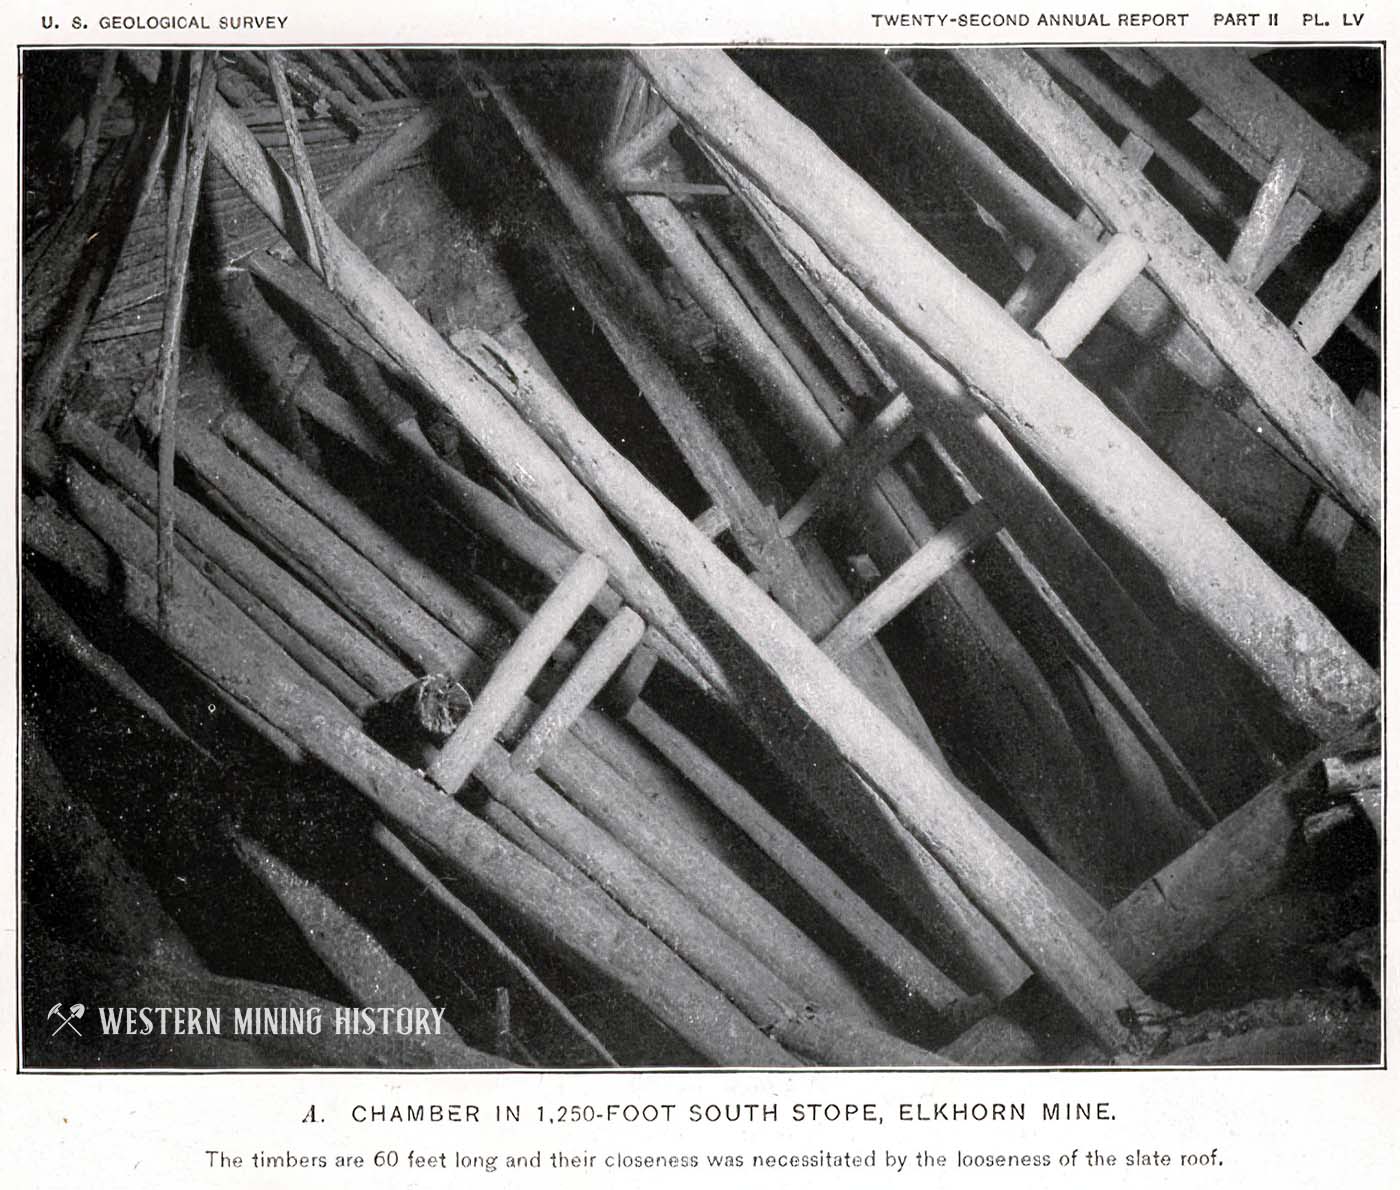 60 foot long timbers at close spacing necessitated by loose slate roof - Elkhorn Mine.